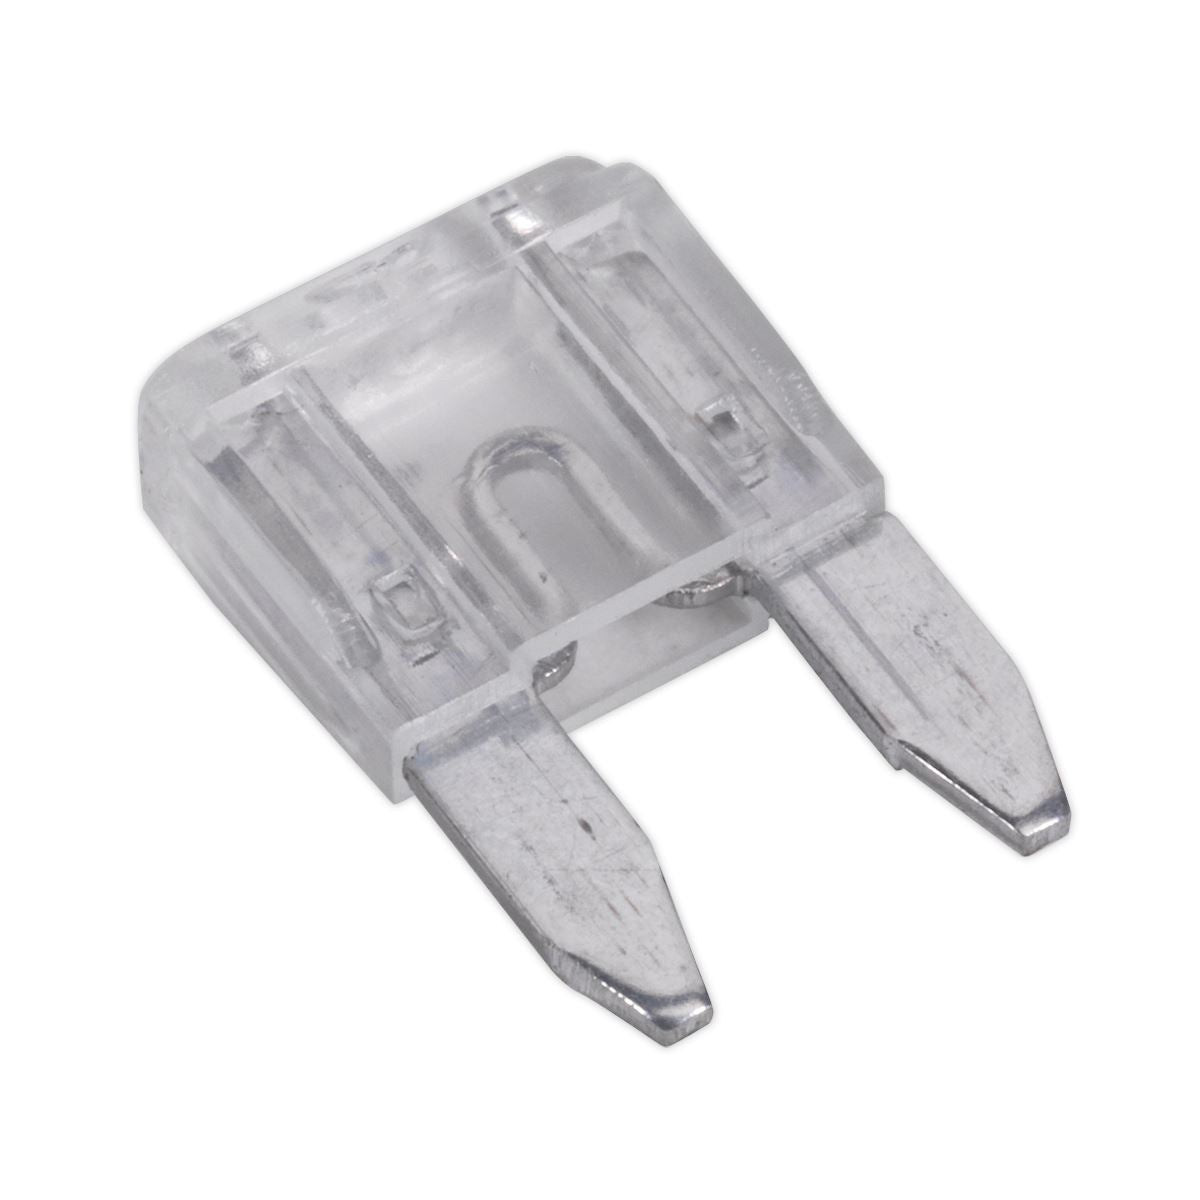 Sealey Automotive MINI Blade Fuse 25A Pack of 50